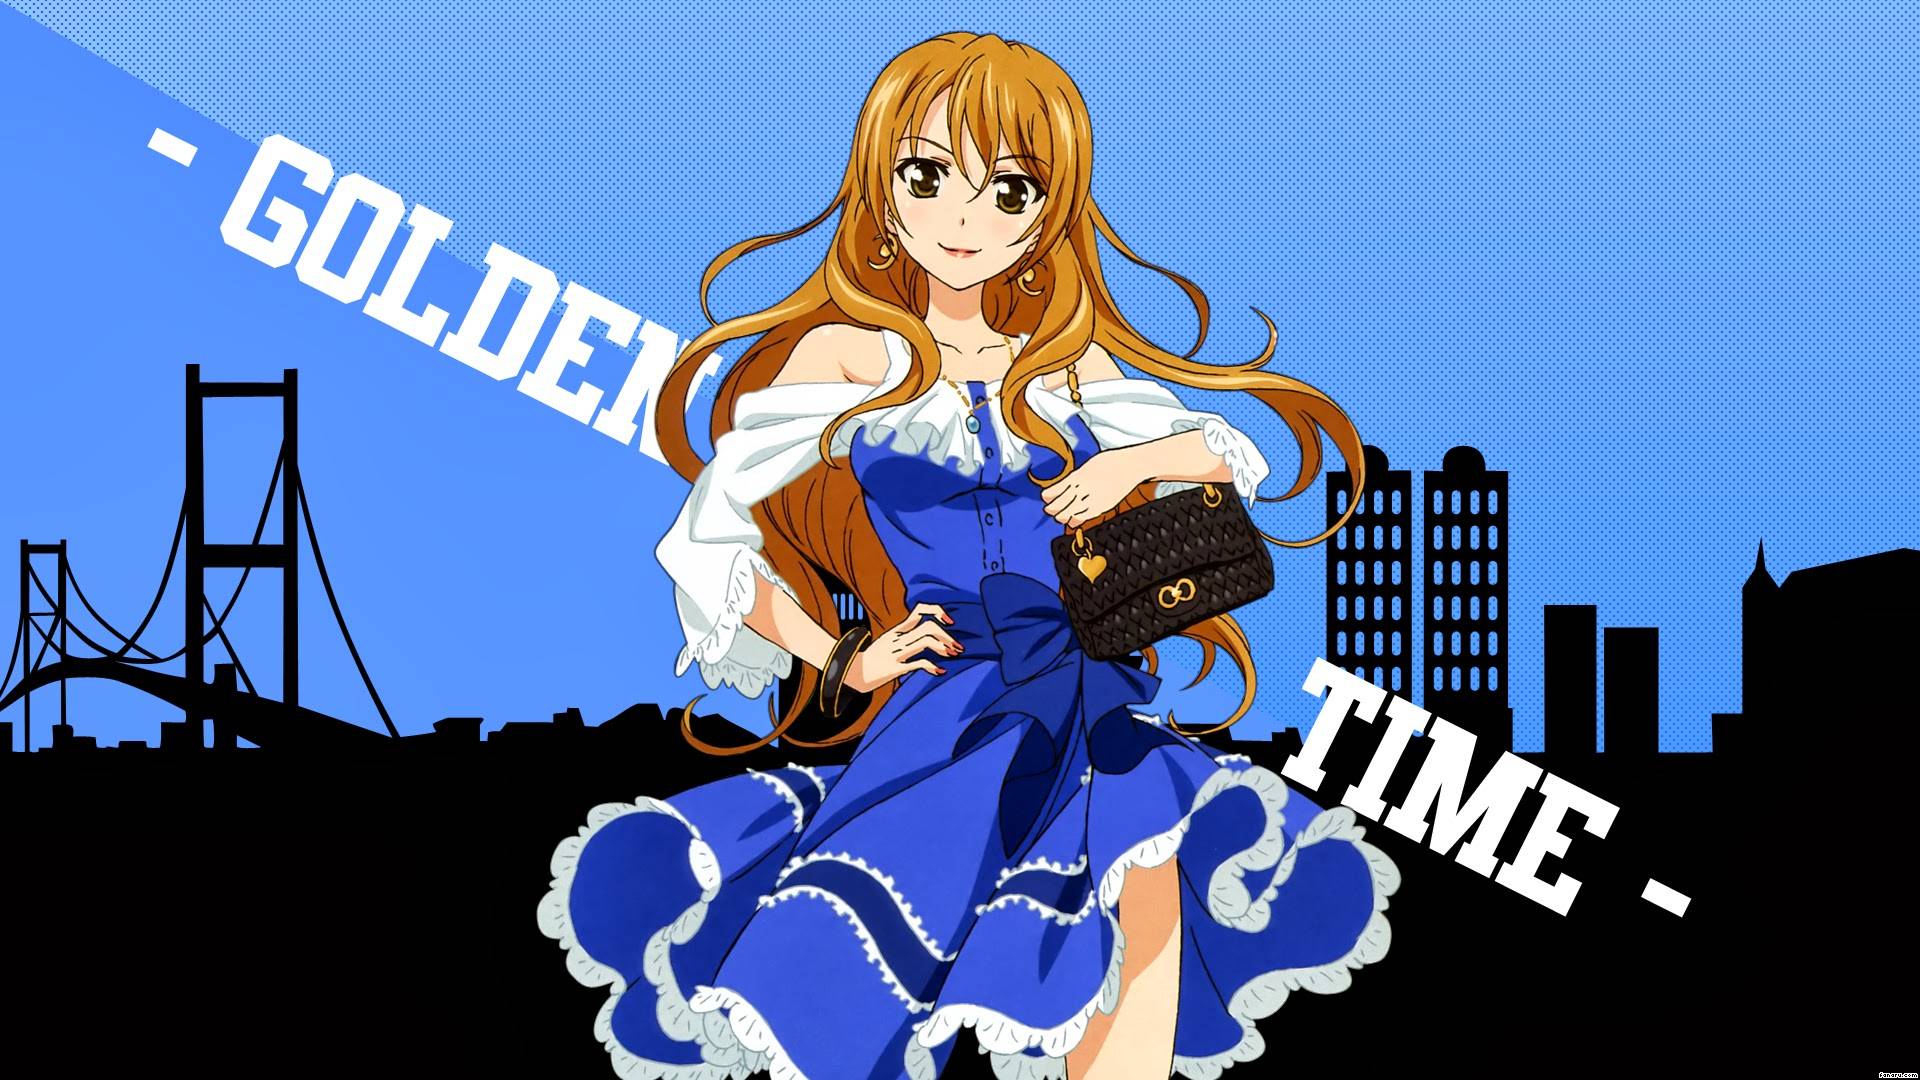 Golden Time Wallpapers Group with 67 items.